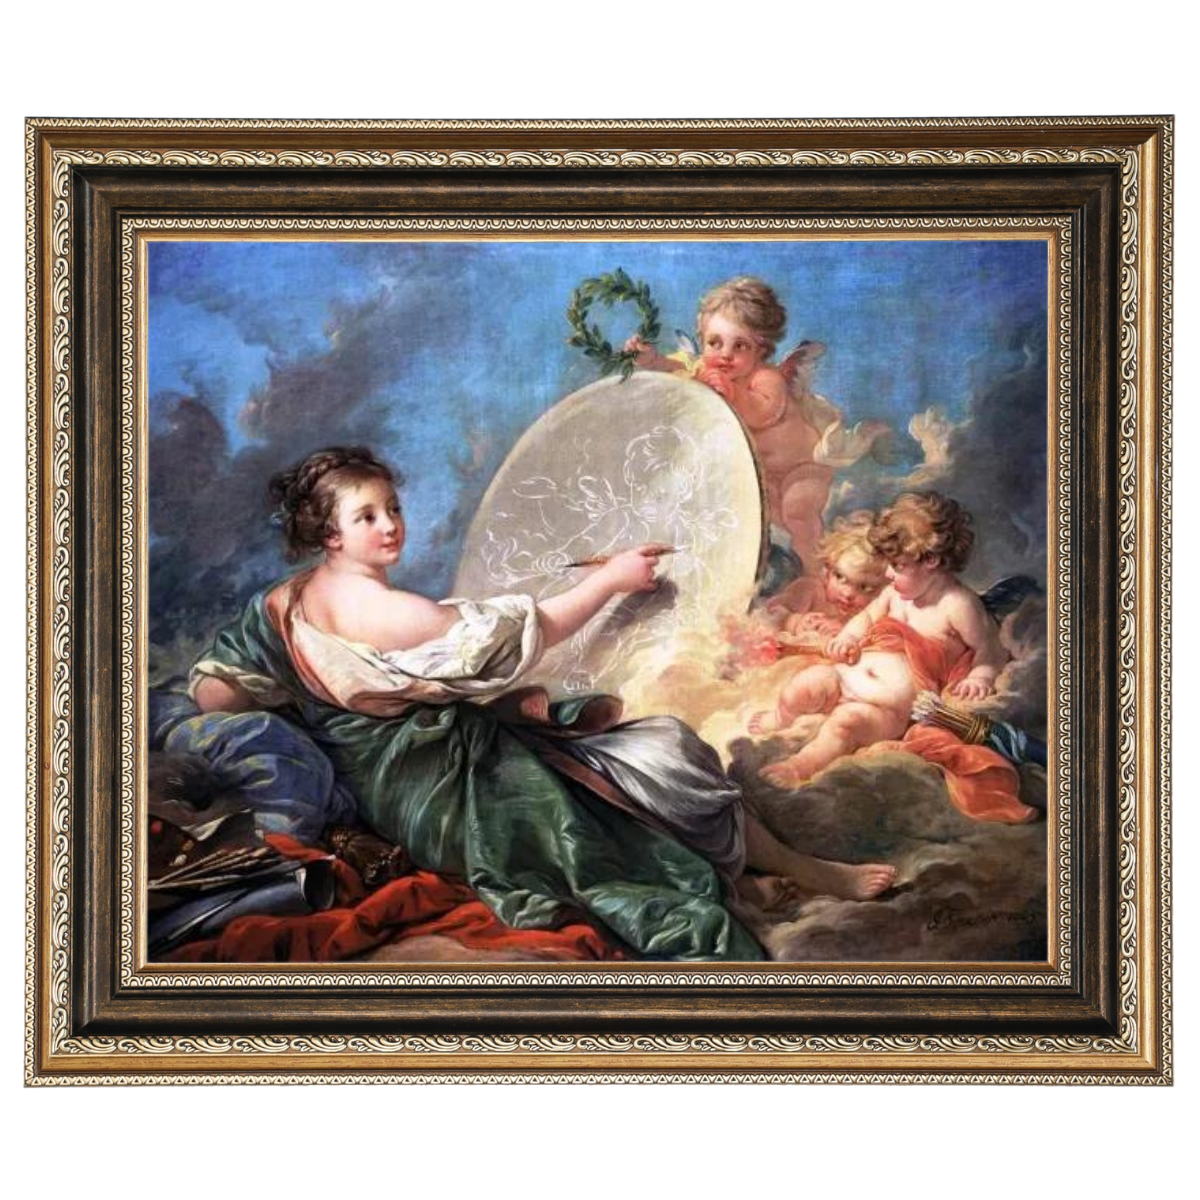 Allegory Of Painting - Vintage Wall Art Prints Decor For Living Room